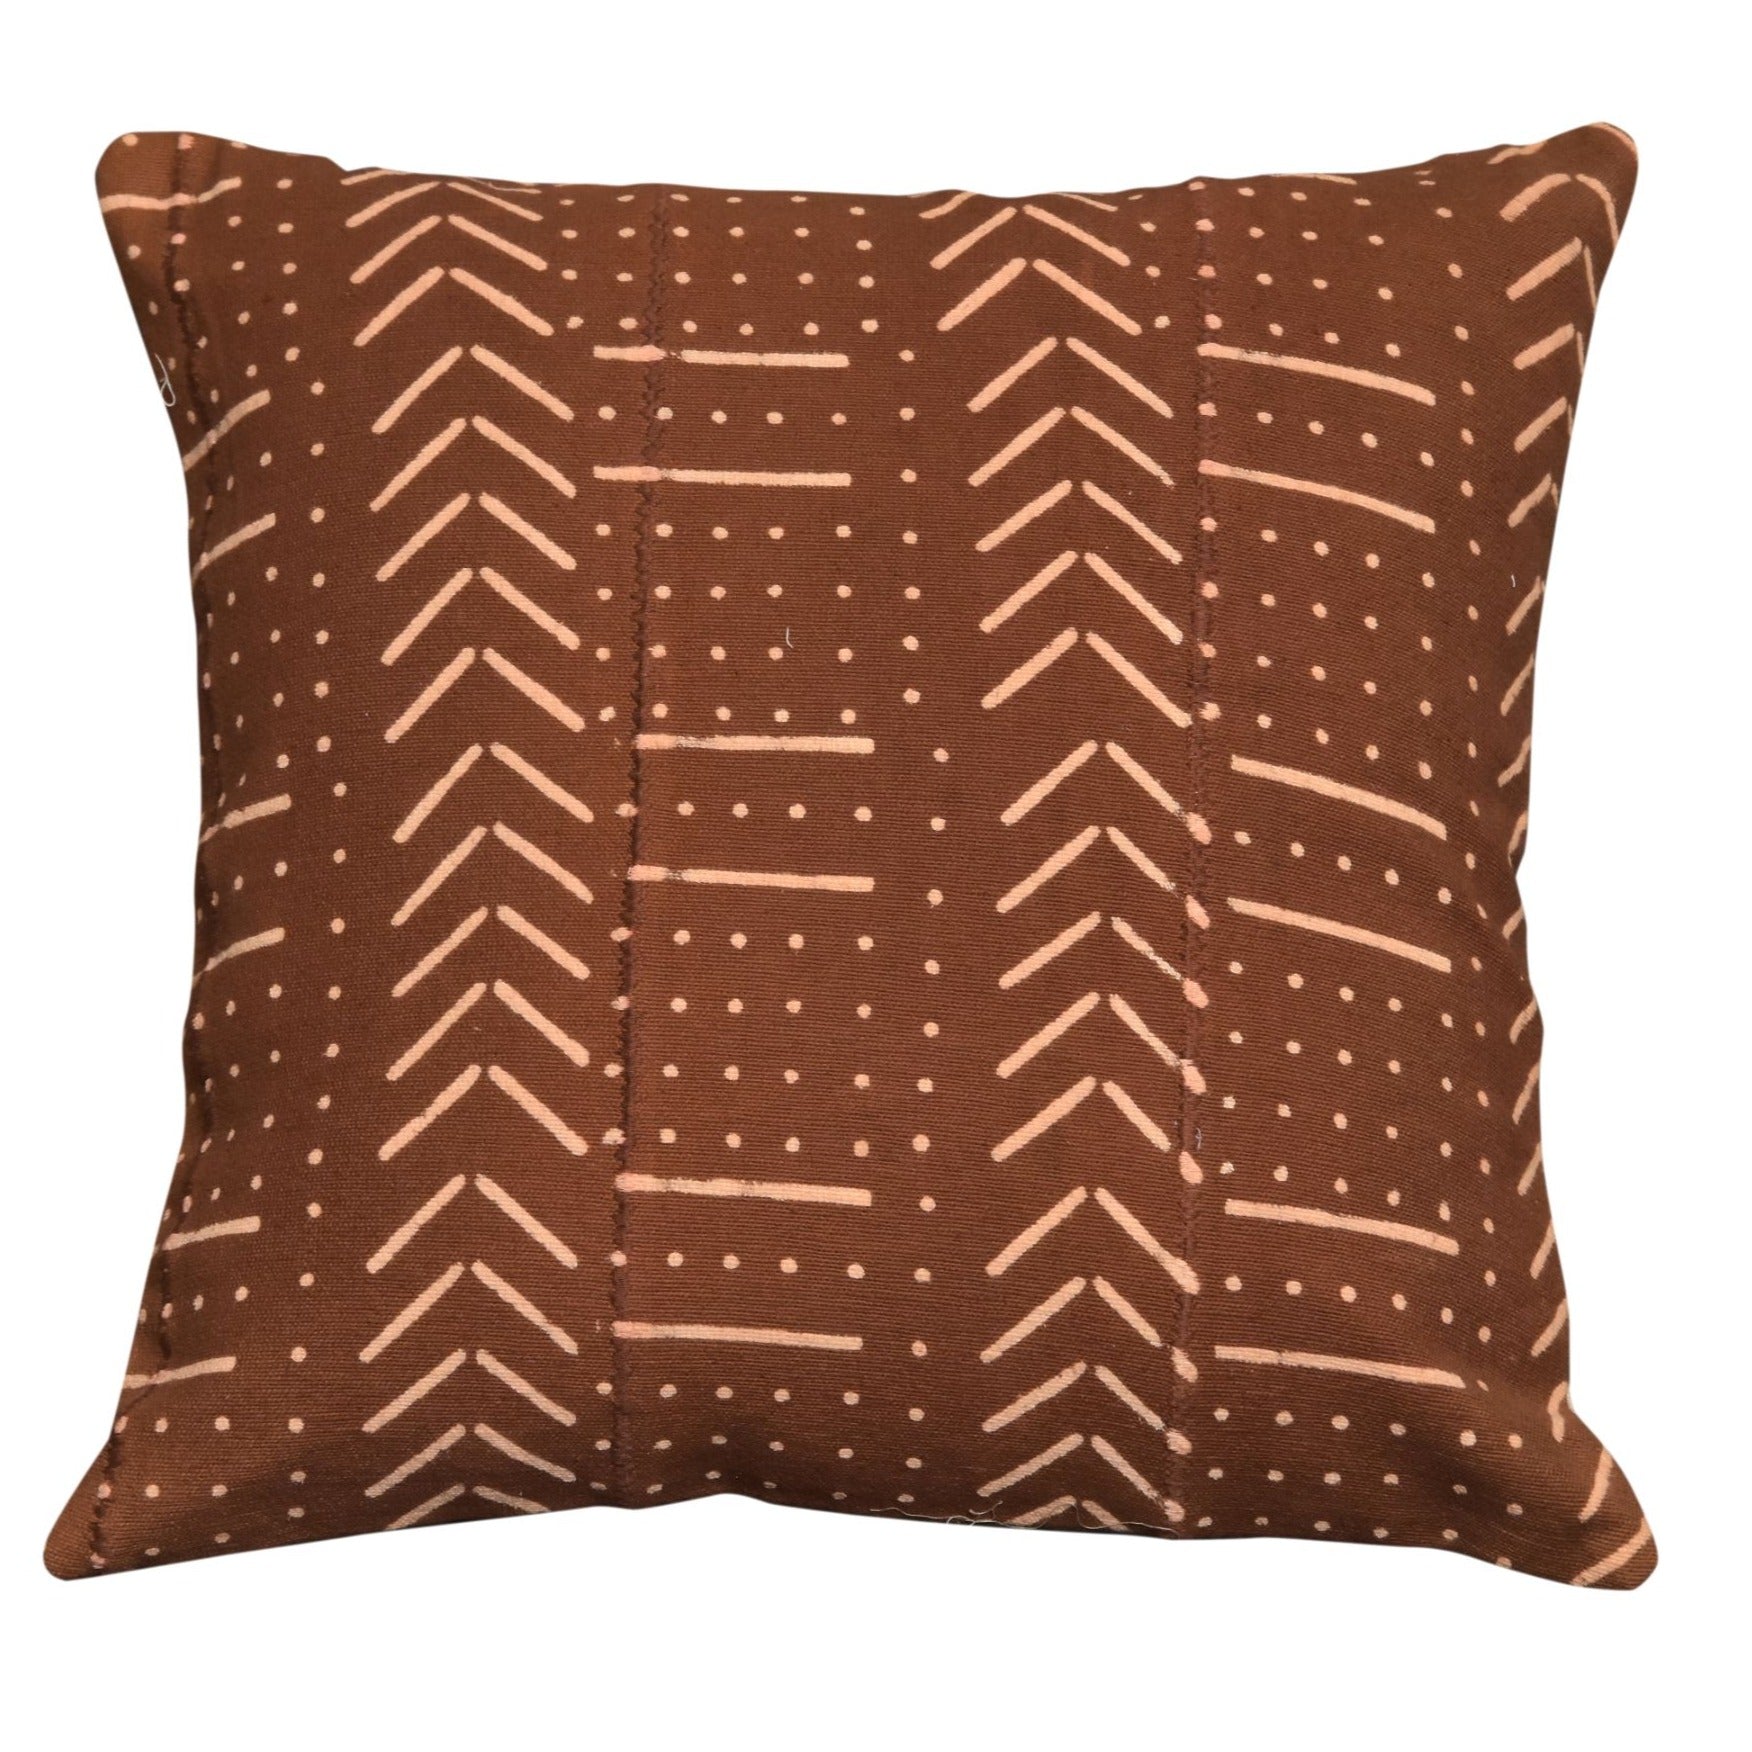 Brown Mudcloth Cushion Cover In 16 x 16 Inches by Neelofar's